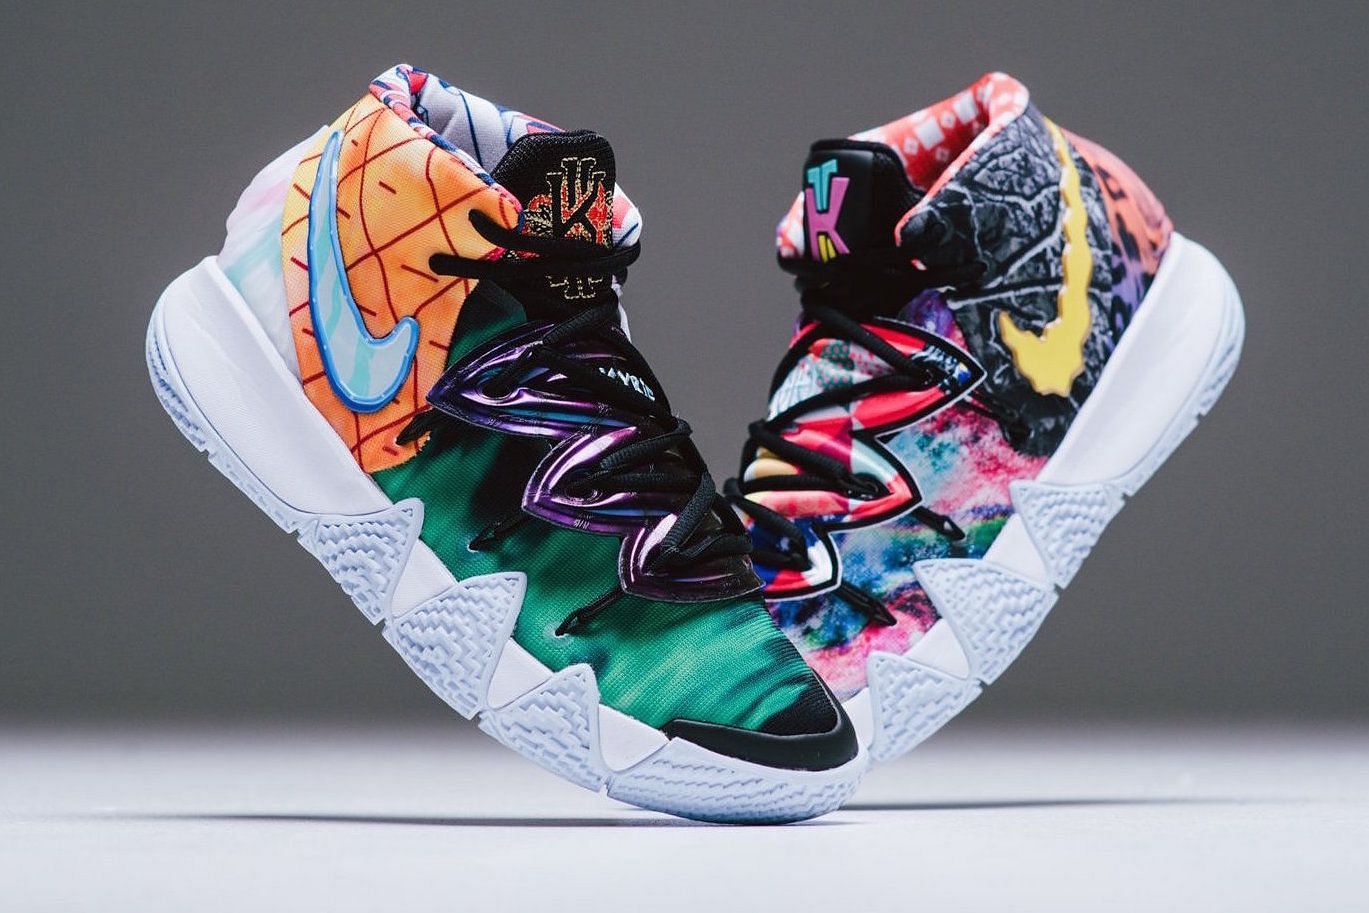 These Kyrie Irving shoes look incredible (Image via Nike)